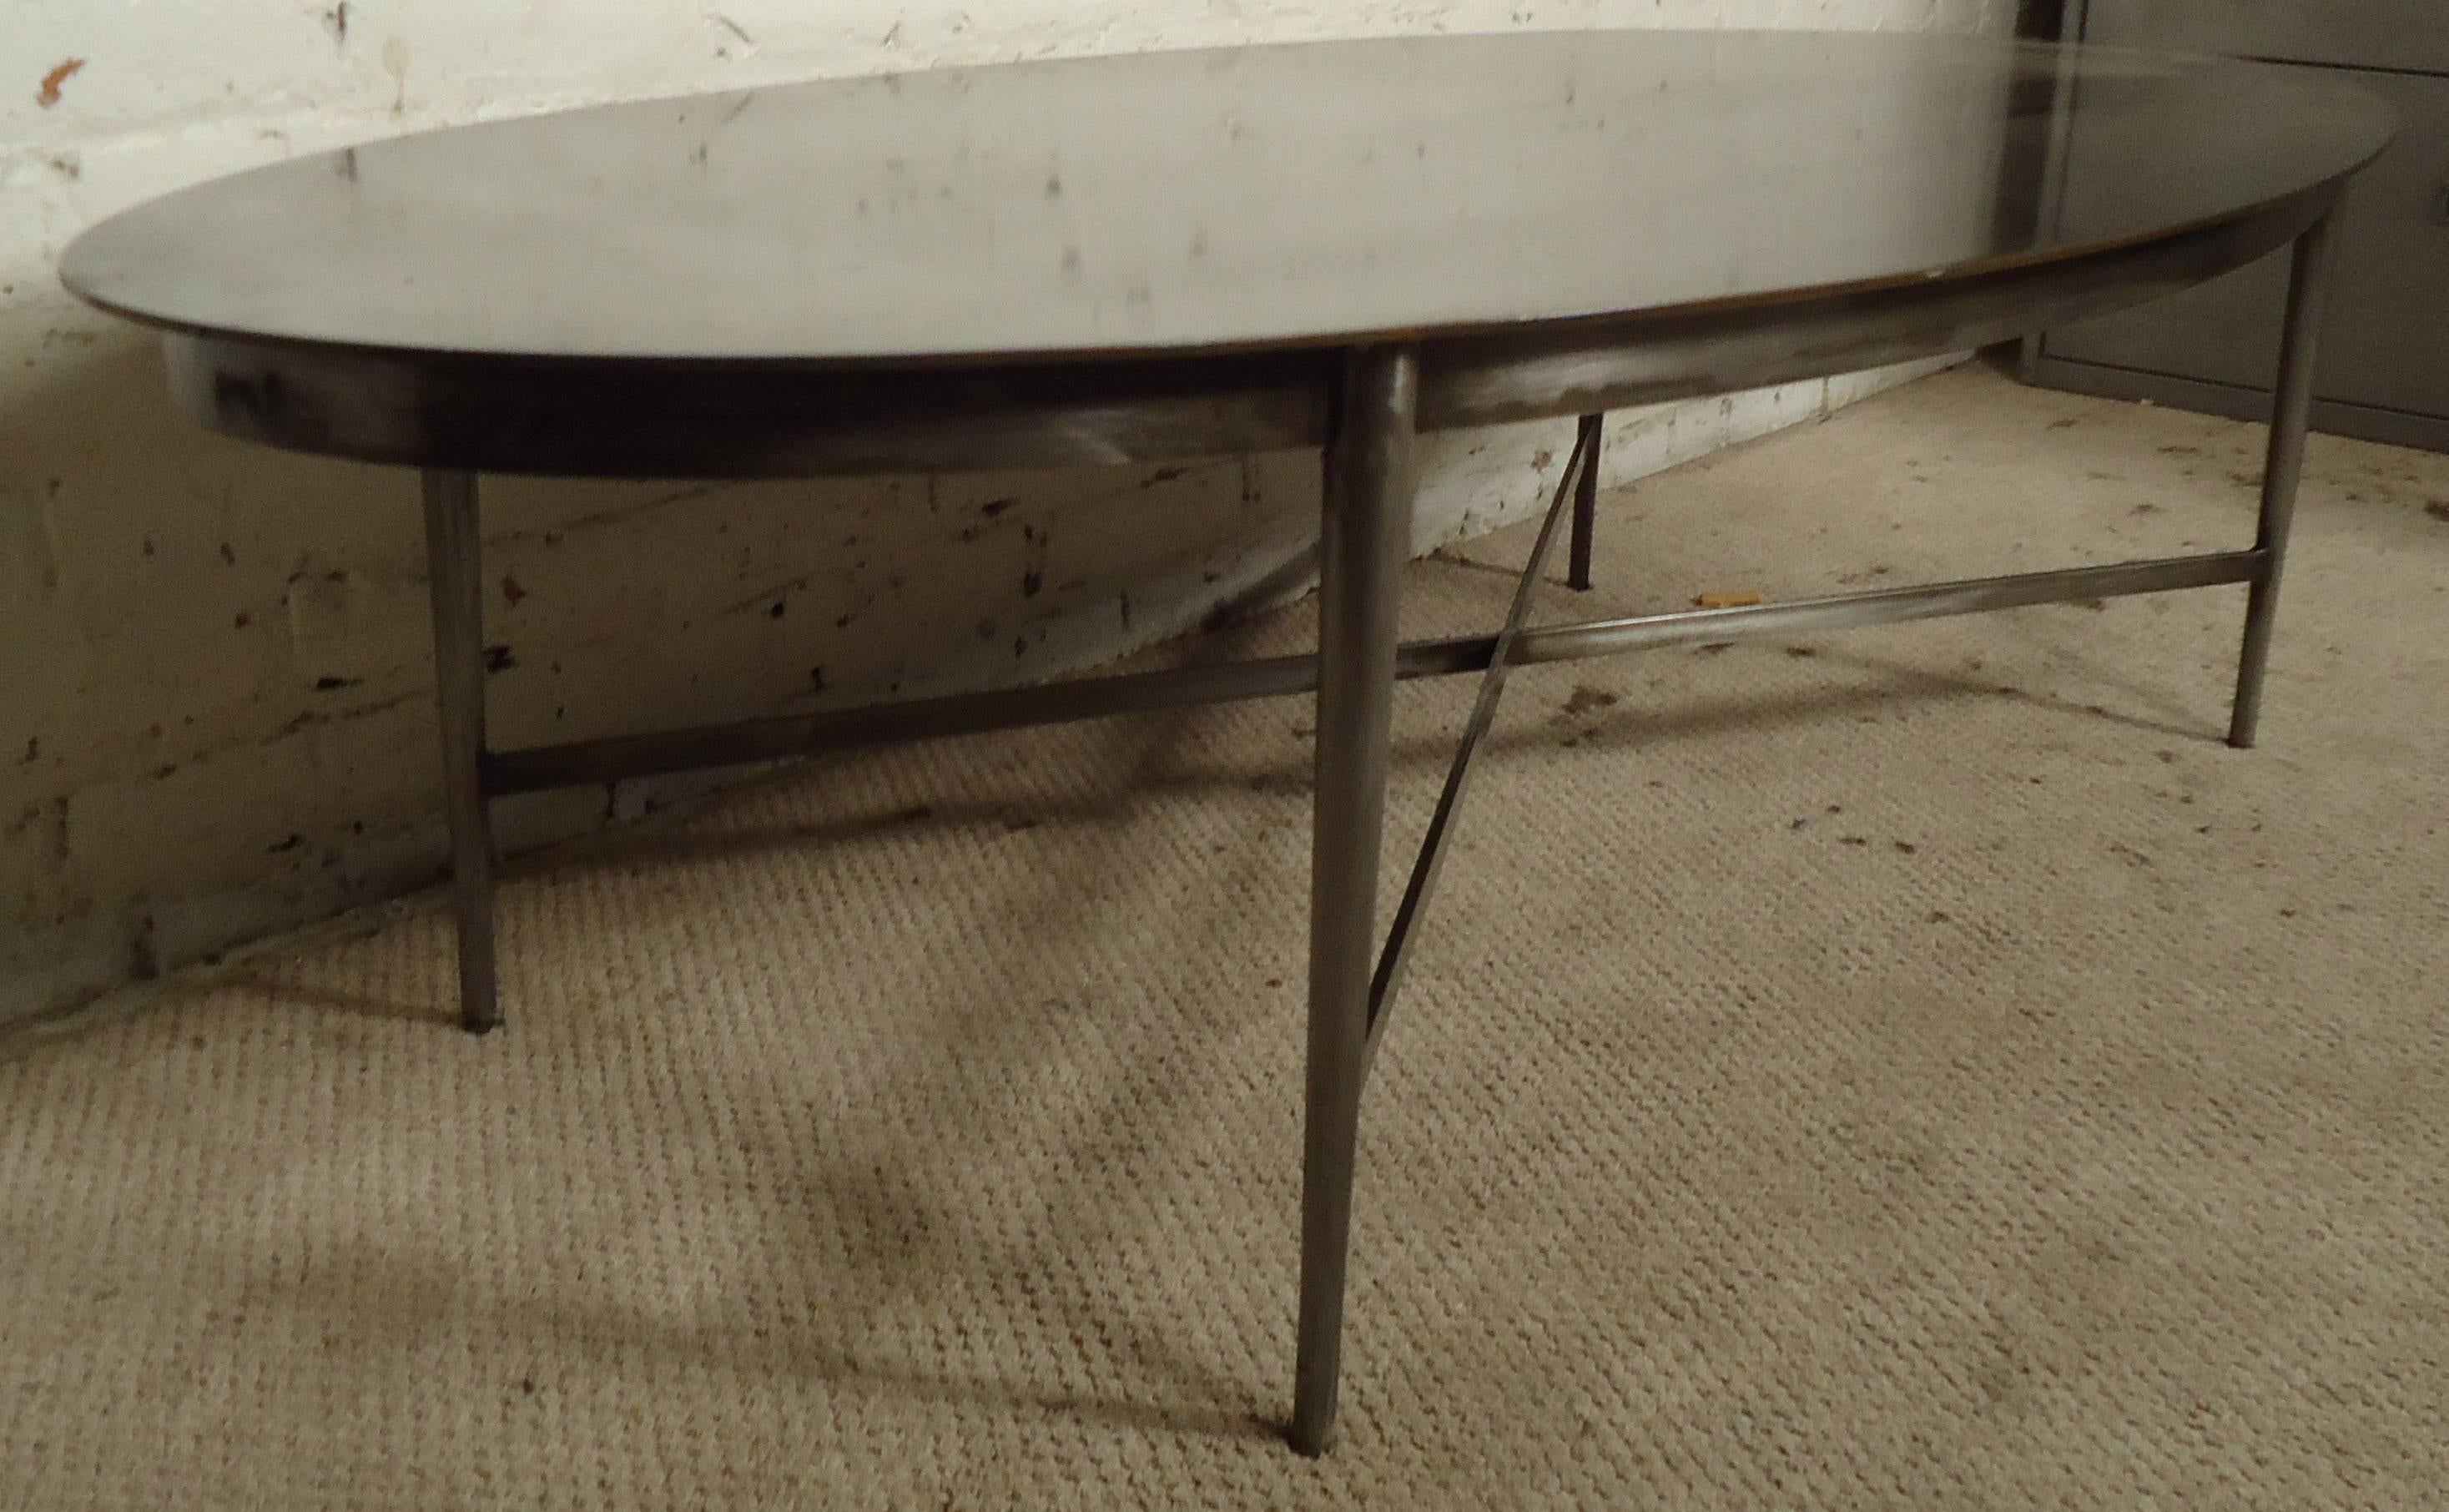 Vintage-modern industrial style coffee table featuring solidly built x-base and oval top. Please confirm item location NY or NJ with dealer.